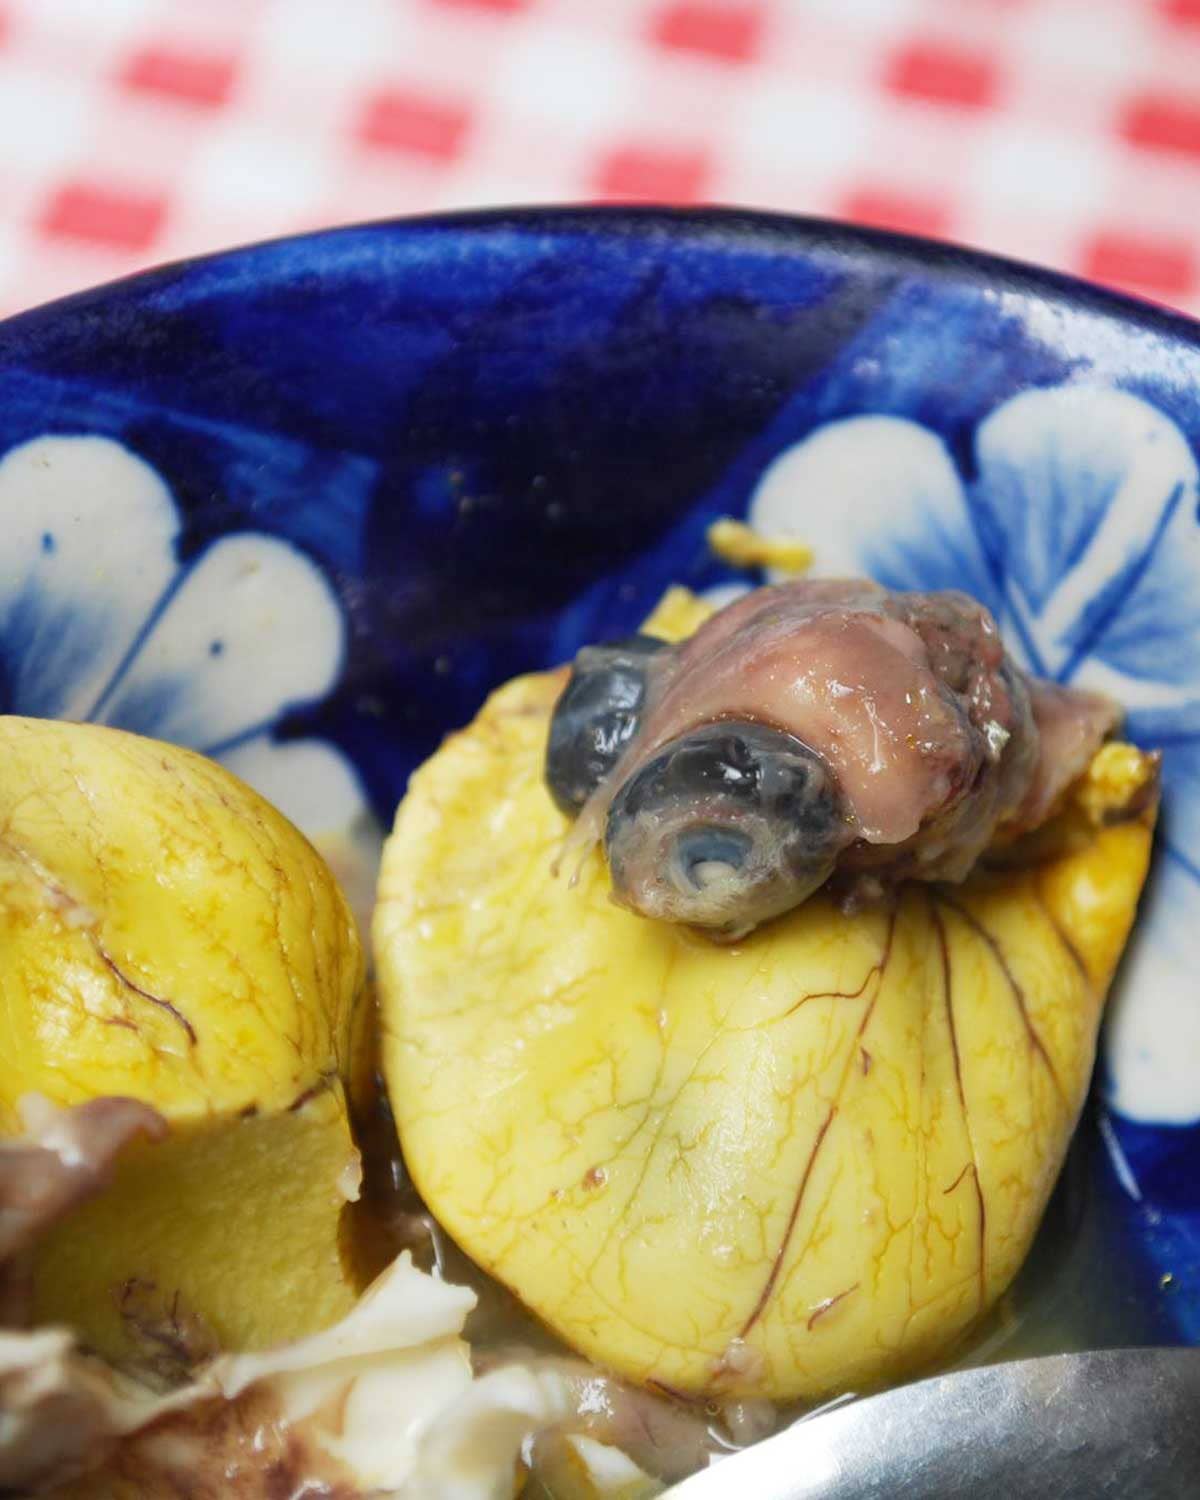 These Are the World’s Strangest Foods, According to People Who Eat Them